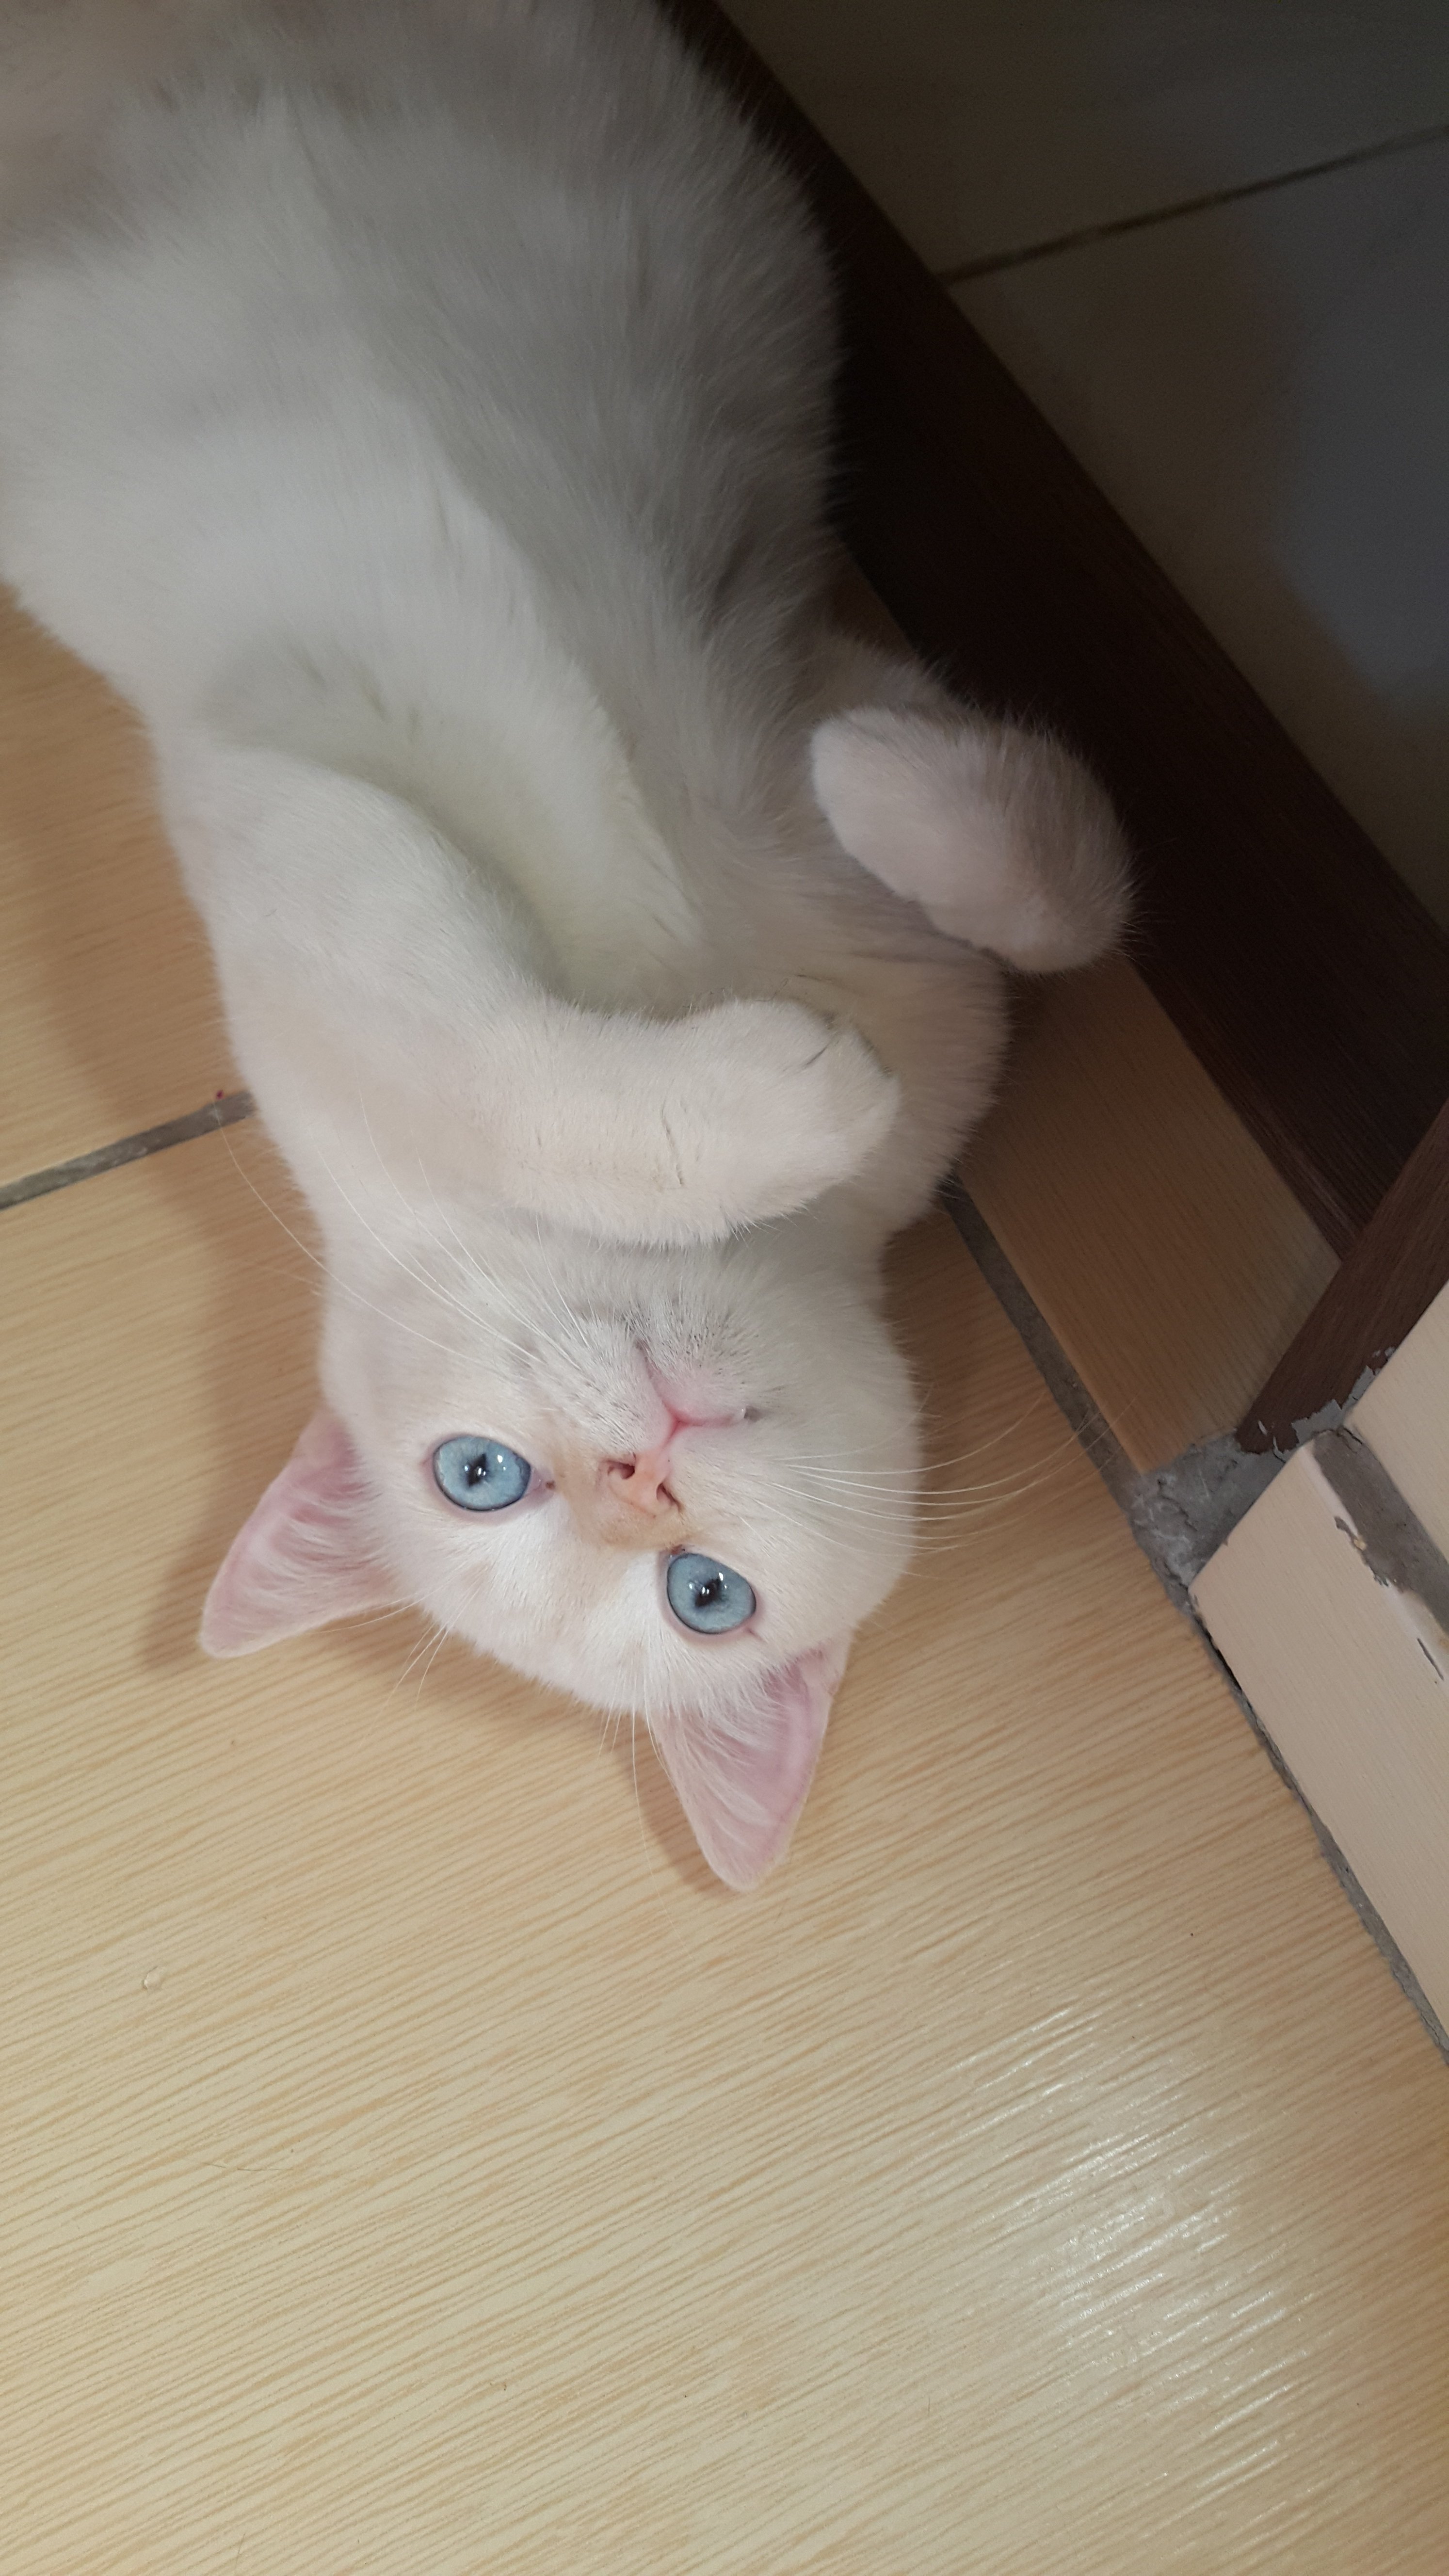 33 HQ Photos Flame Point Siamese Cat Price : Siamese Cats For Sale | Titusville, FL #247906 | Petzlover